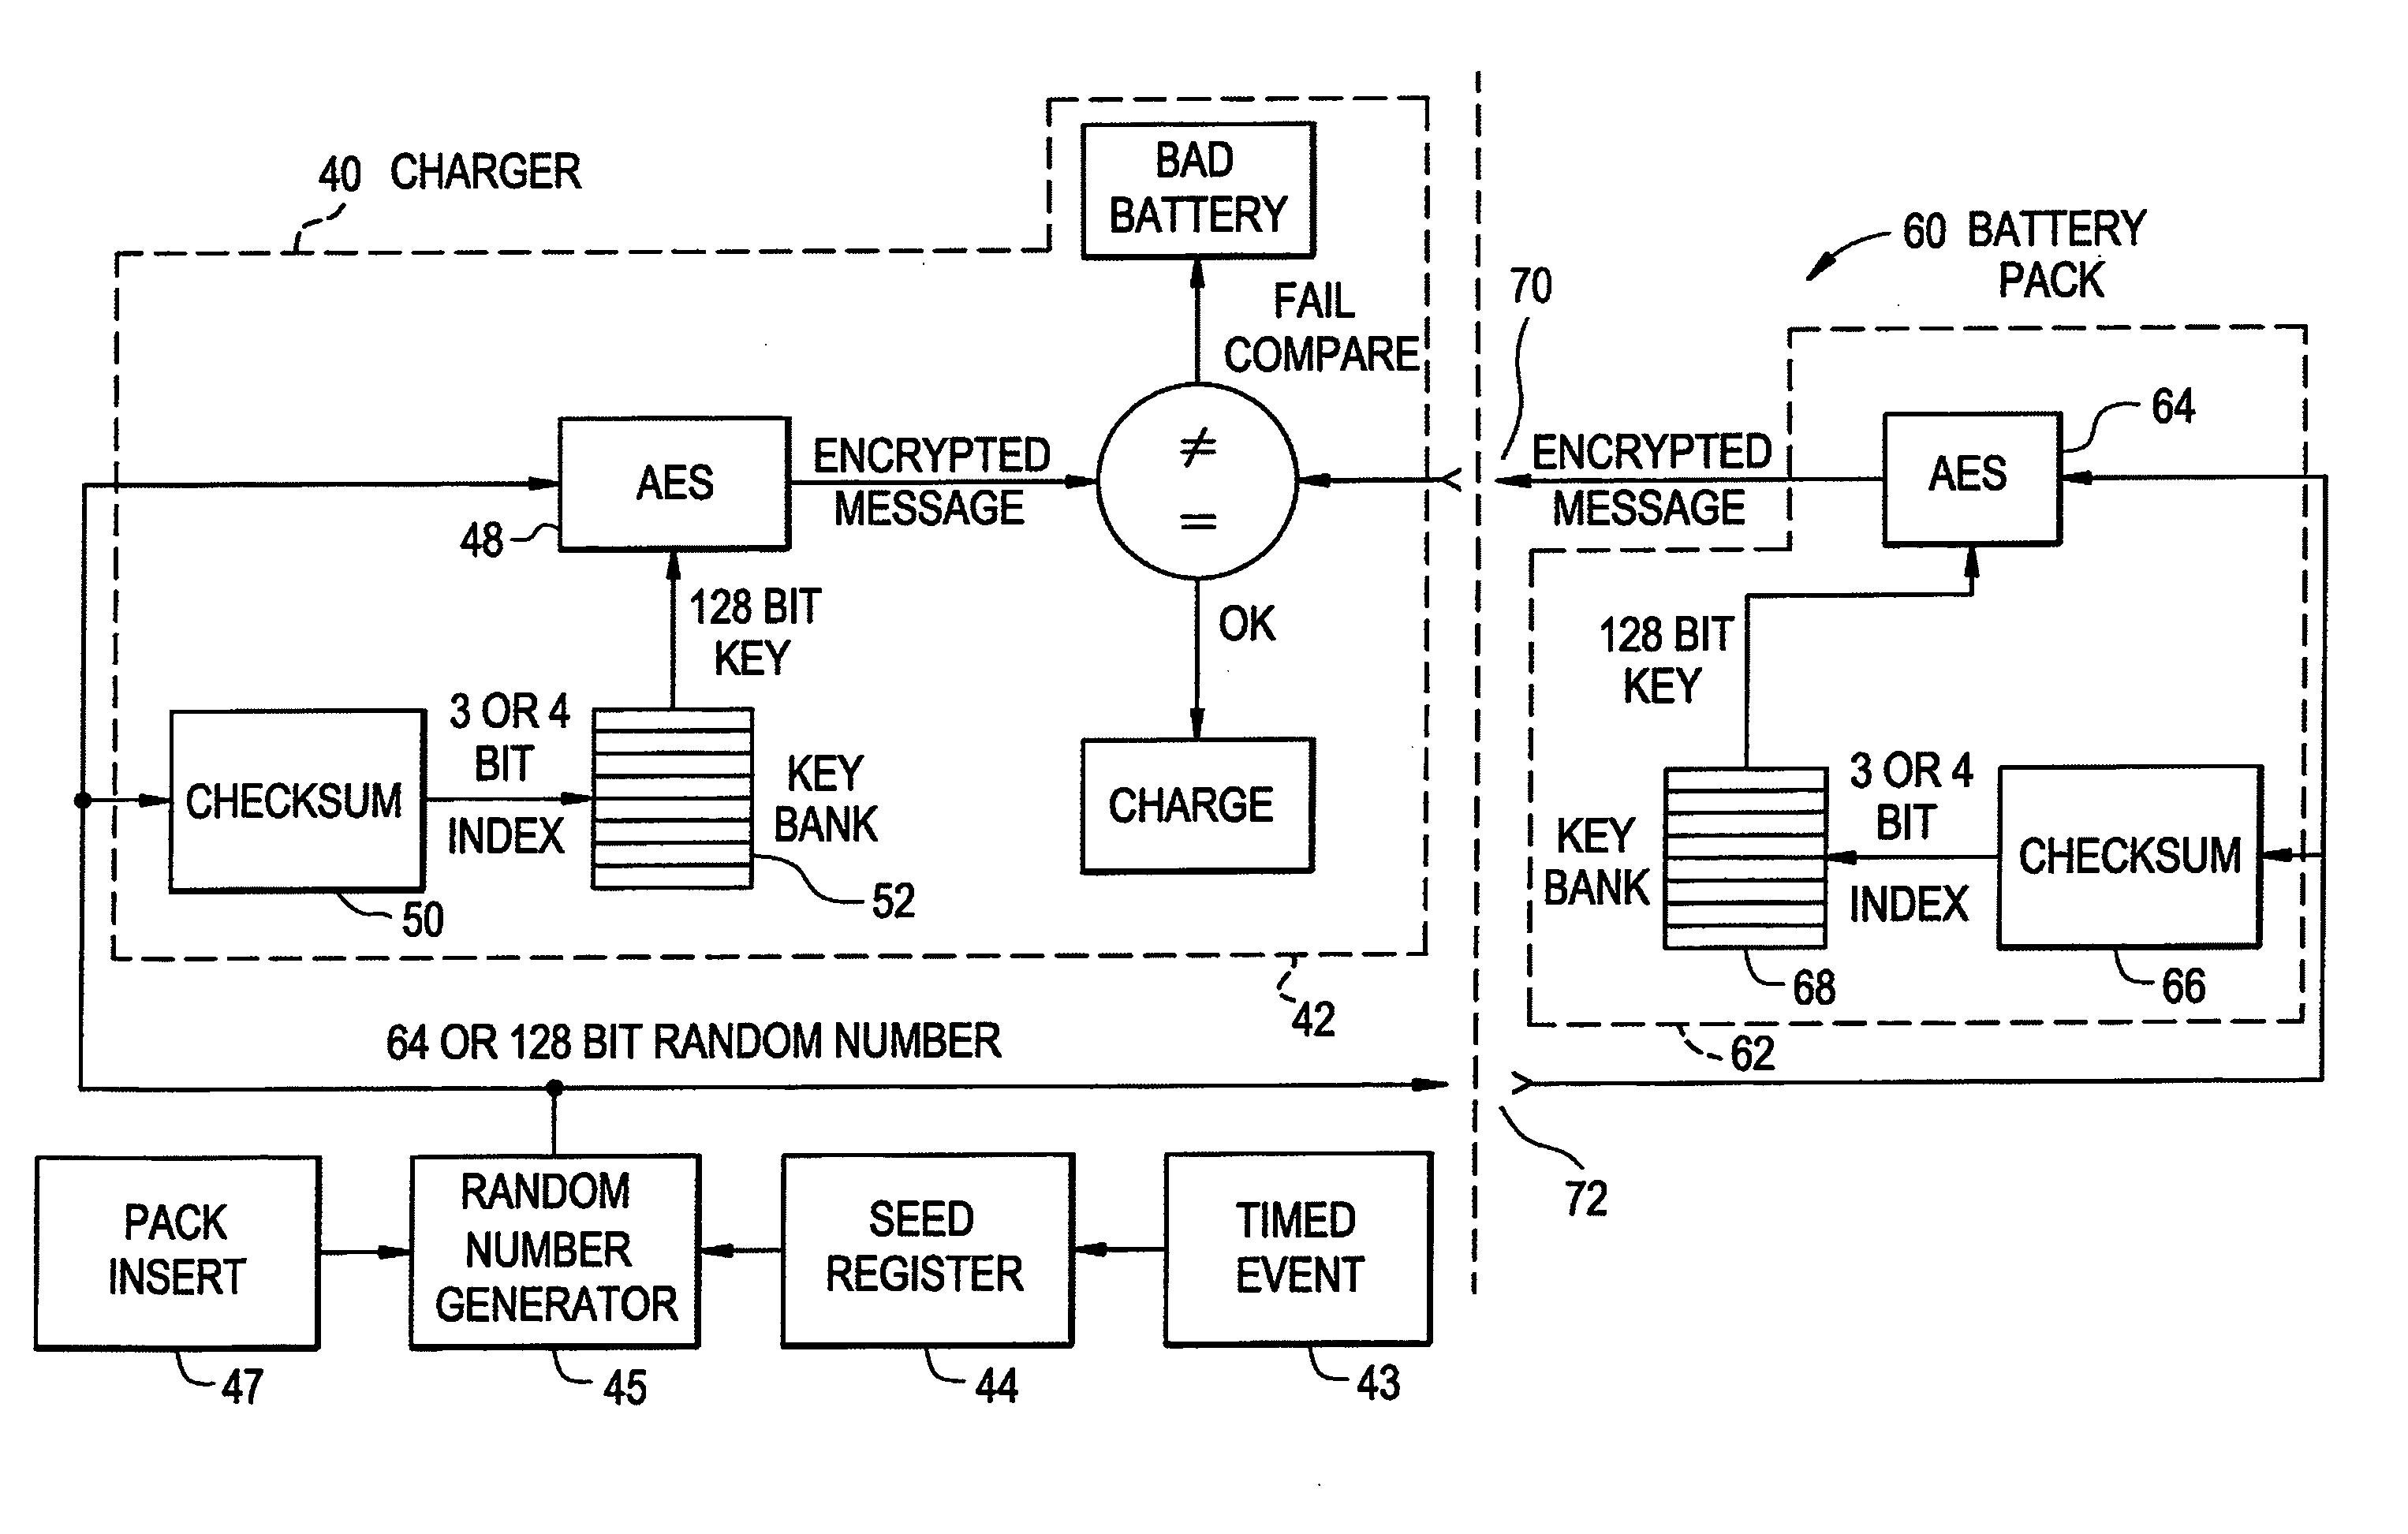 Rechargeable battery pack and operating system